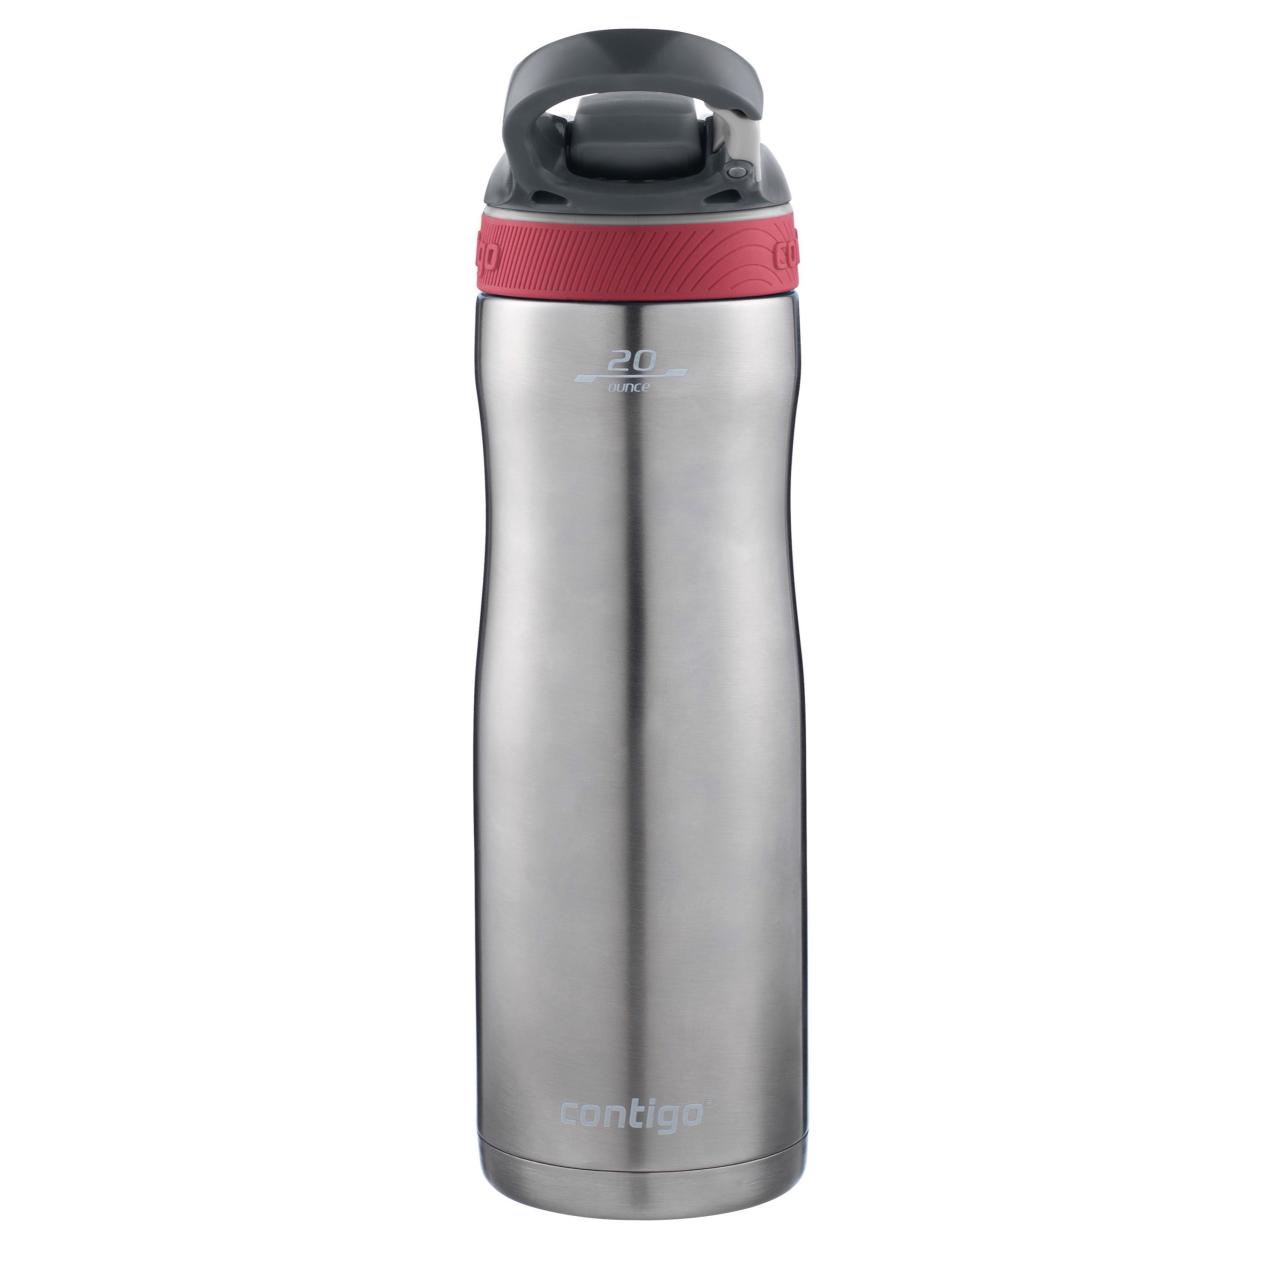 Ashland Chill Autospout Stainless Steel Water Bottle Contigo 20 oz Sporting  Goods Canteens, Bottles & Flasks romeinformation.it